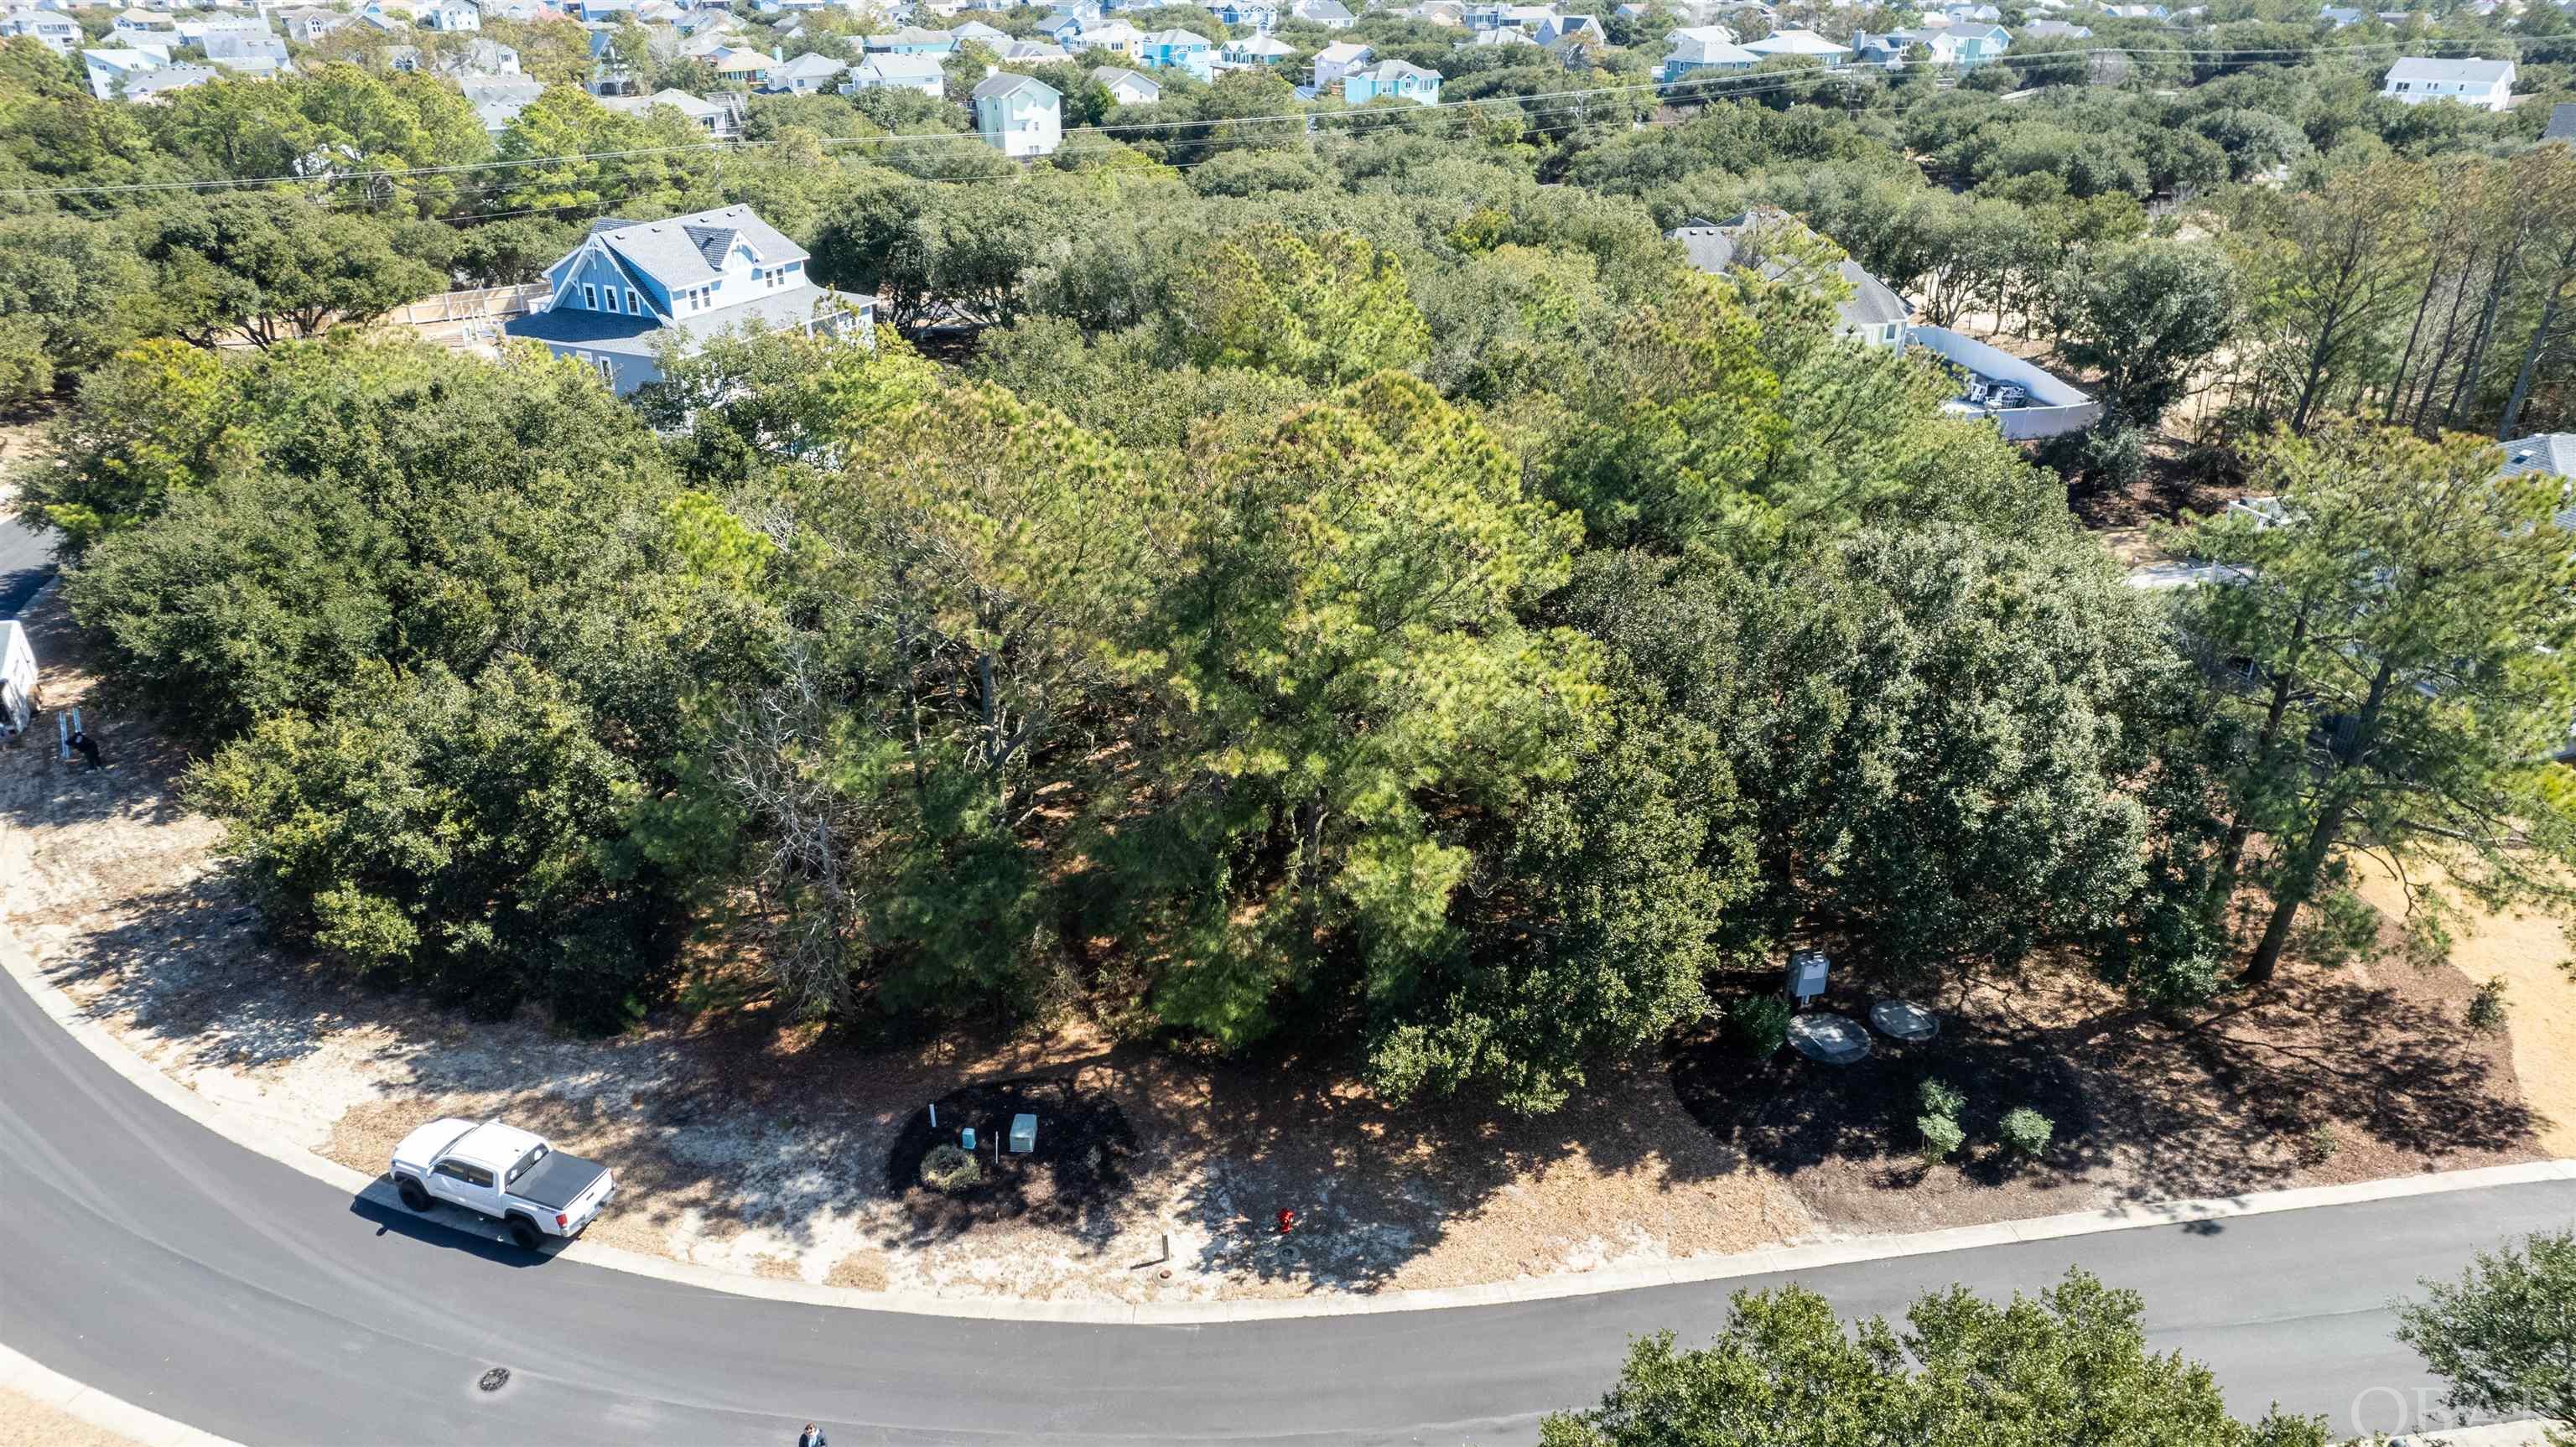 This picturesque homesite is located at the north end of The Currituck Club for the ultimate peace and quiet.  The location is close to the north community pool and just one lot off the sound front you may have a view of the sound and marsh from the upper level of your new home.  You do not want to miss this one. The Currituck Club is an exquisite resort community. It is the ideal location to build a primary residence, second home, or vacation rental with exceptional surrounding homes. Owners and guests have access to a wide array of amenities. There are a variety of stunning live oak trees on the lot.  This includes but is not limited to a private, gated community with a security guard to monitor those who enter the community 24 hours a day. There is a Trolley Service that runs seven days a week all summer. The fitness center is open seven days a week. There are many areas to enjoy various sporting activities around the fitness center including basketball courts, tennis and pickle-ball courts, a sand volleyball court, a shuffleboard court, and a bocce ball court. Not only are there awesome fitness amenities, but there are also 3 community pools! The main pool also has a tiki bar, a great socializing place! For the golfers in the group, there is an extraordinary 18-hole semi-private golf course designed by the legendary Rees Jones. Additionally, you will find a world class practice facility including a putting green, driving range and a bunker. It is a par 72 golf course that is fantastically maintained. Your future home would offer sweeping sound views. There is a restaurant available at the Hunt Club Tavern. Exceptional opportunity!  Survey and proposed site plan on file.